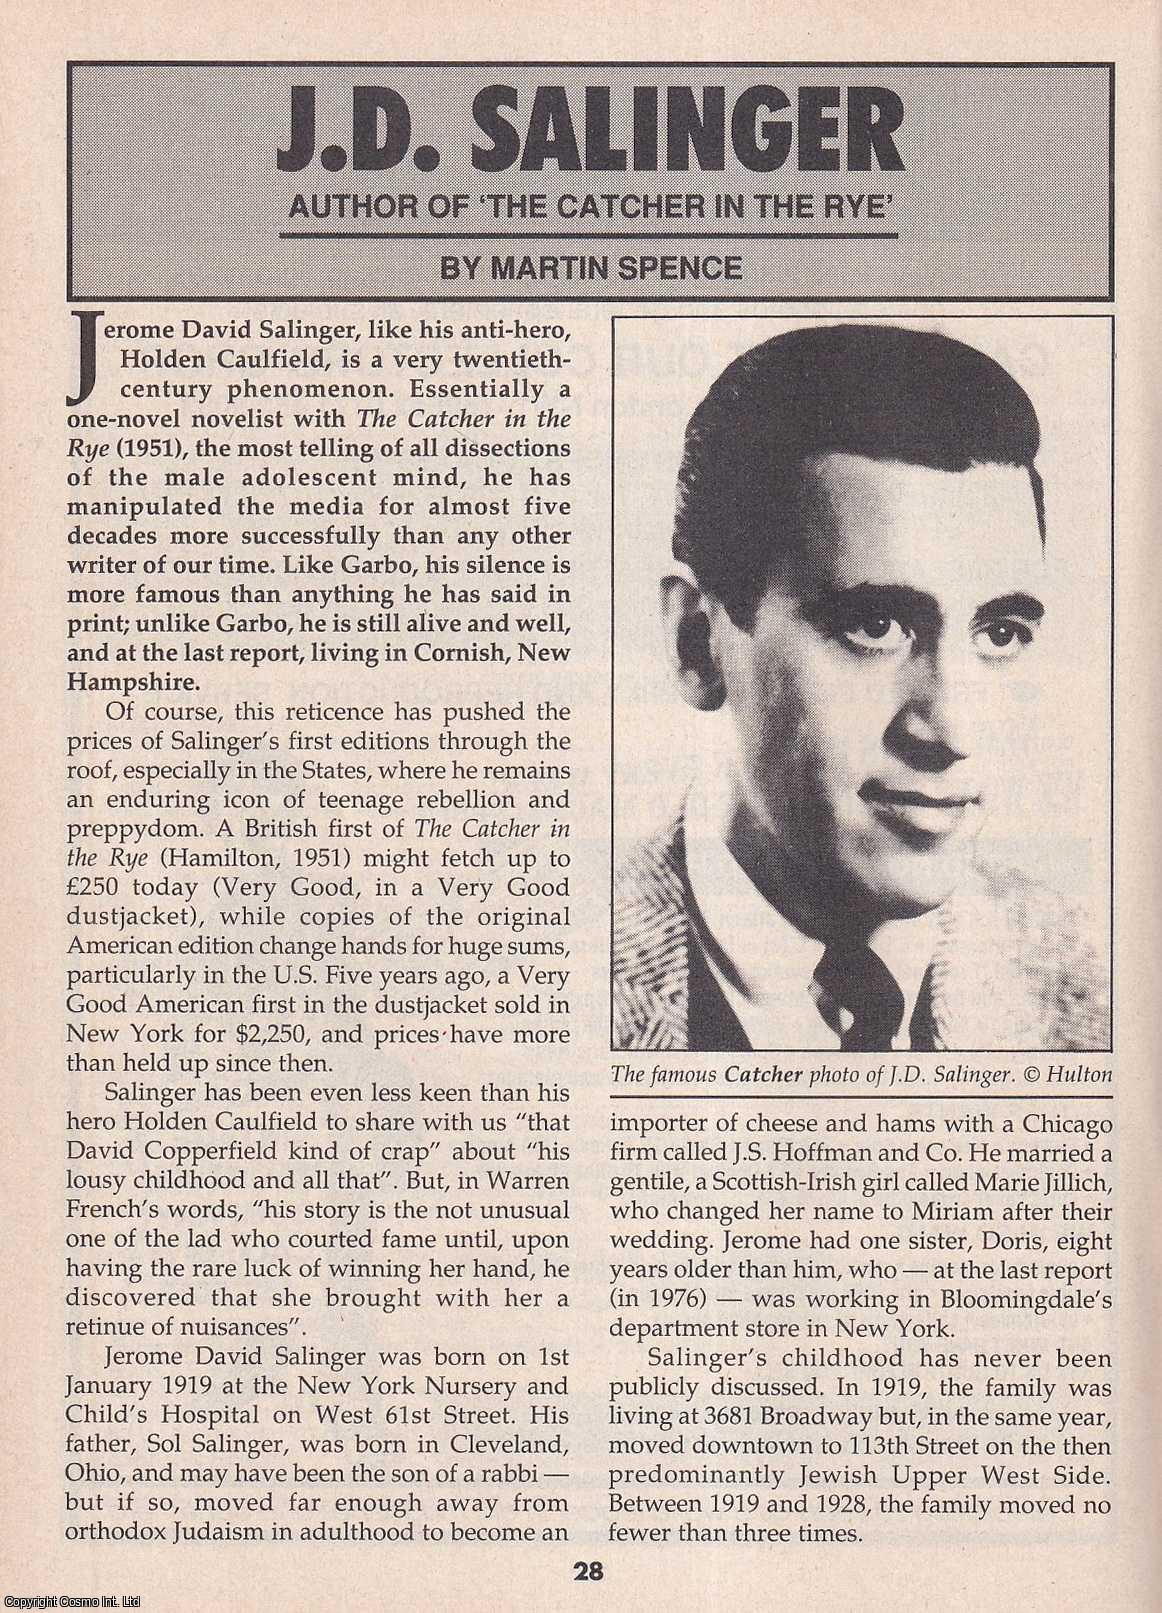 Martin Spence - J. D. Salinger. Author of The Catcher in The Rye. This is an original article separated from an issue of The Book & Magazine Collector publication.